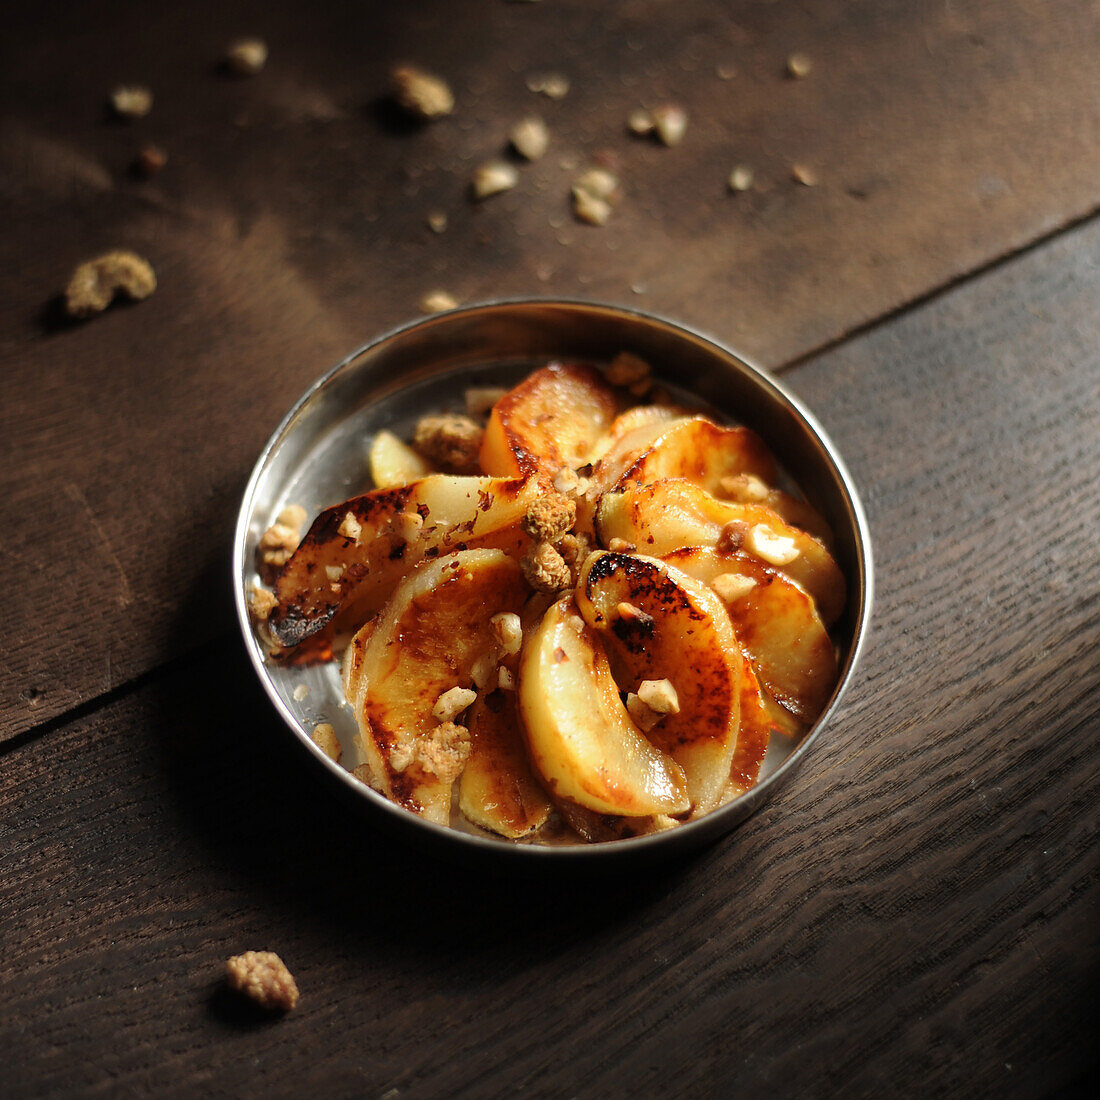 Roasted apples and pears with crumbles and macadamia nuts